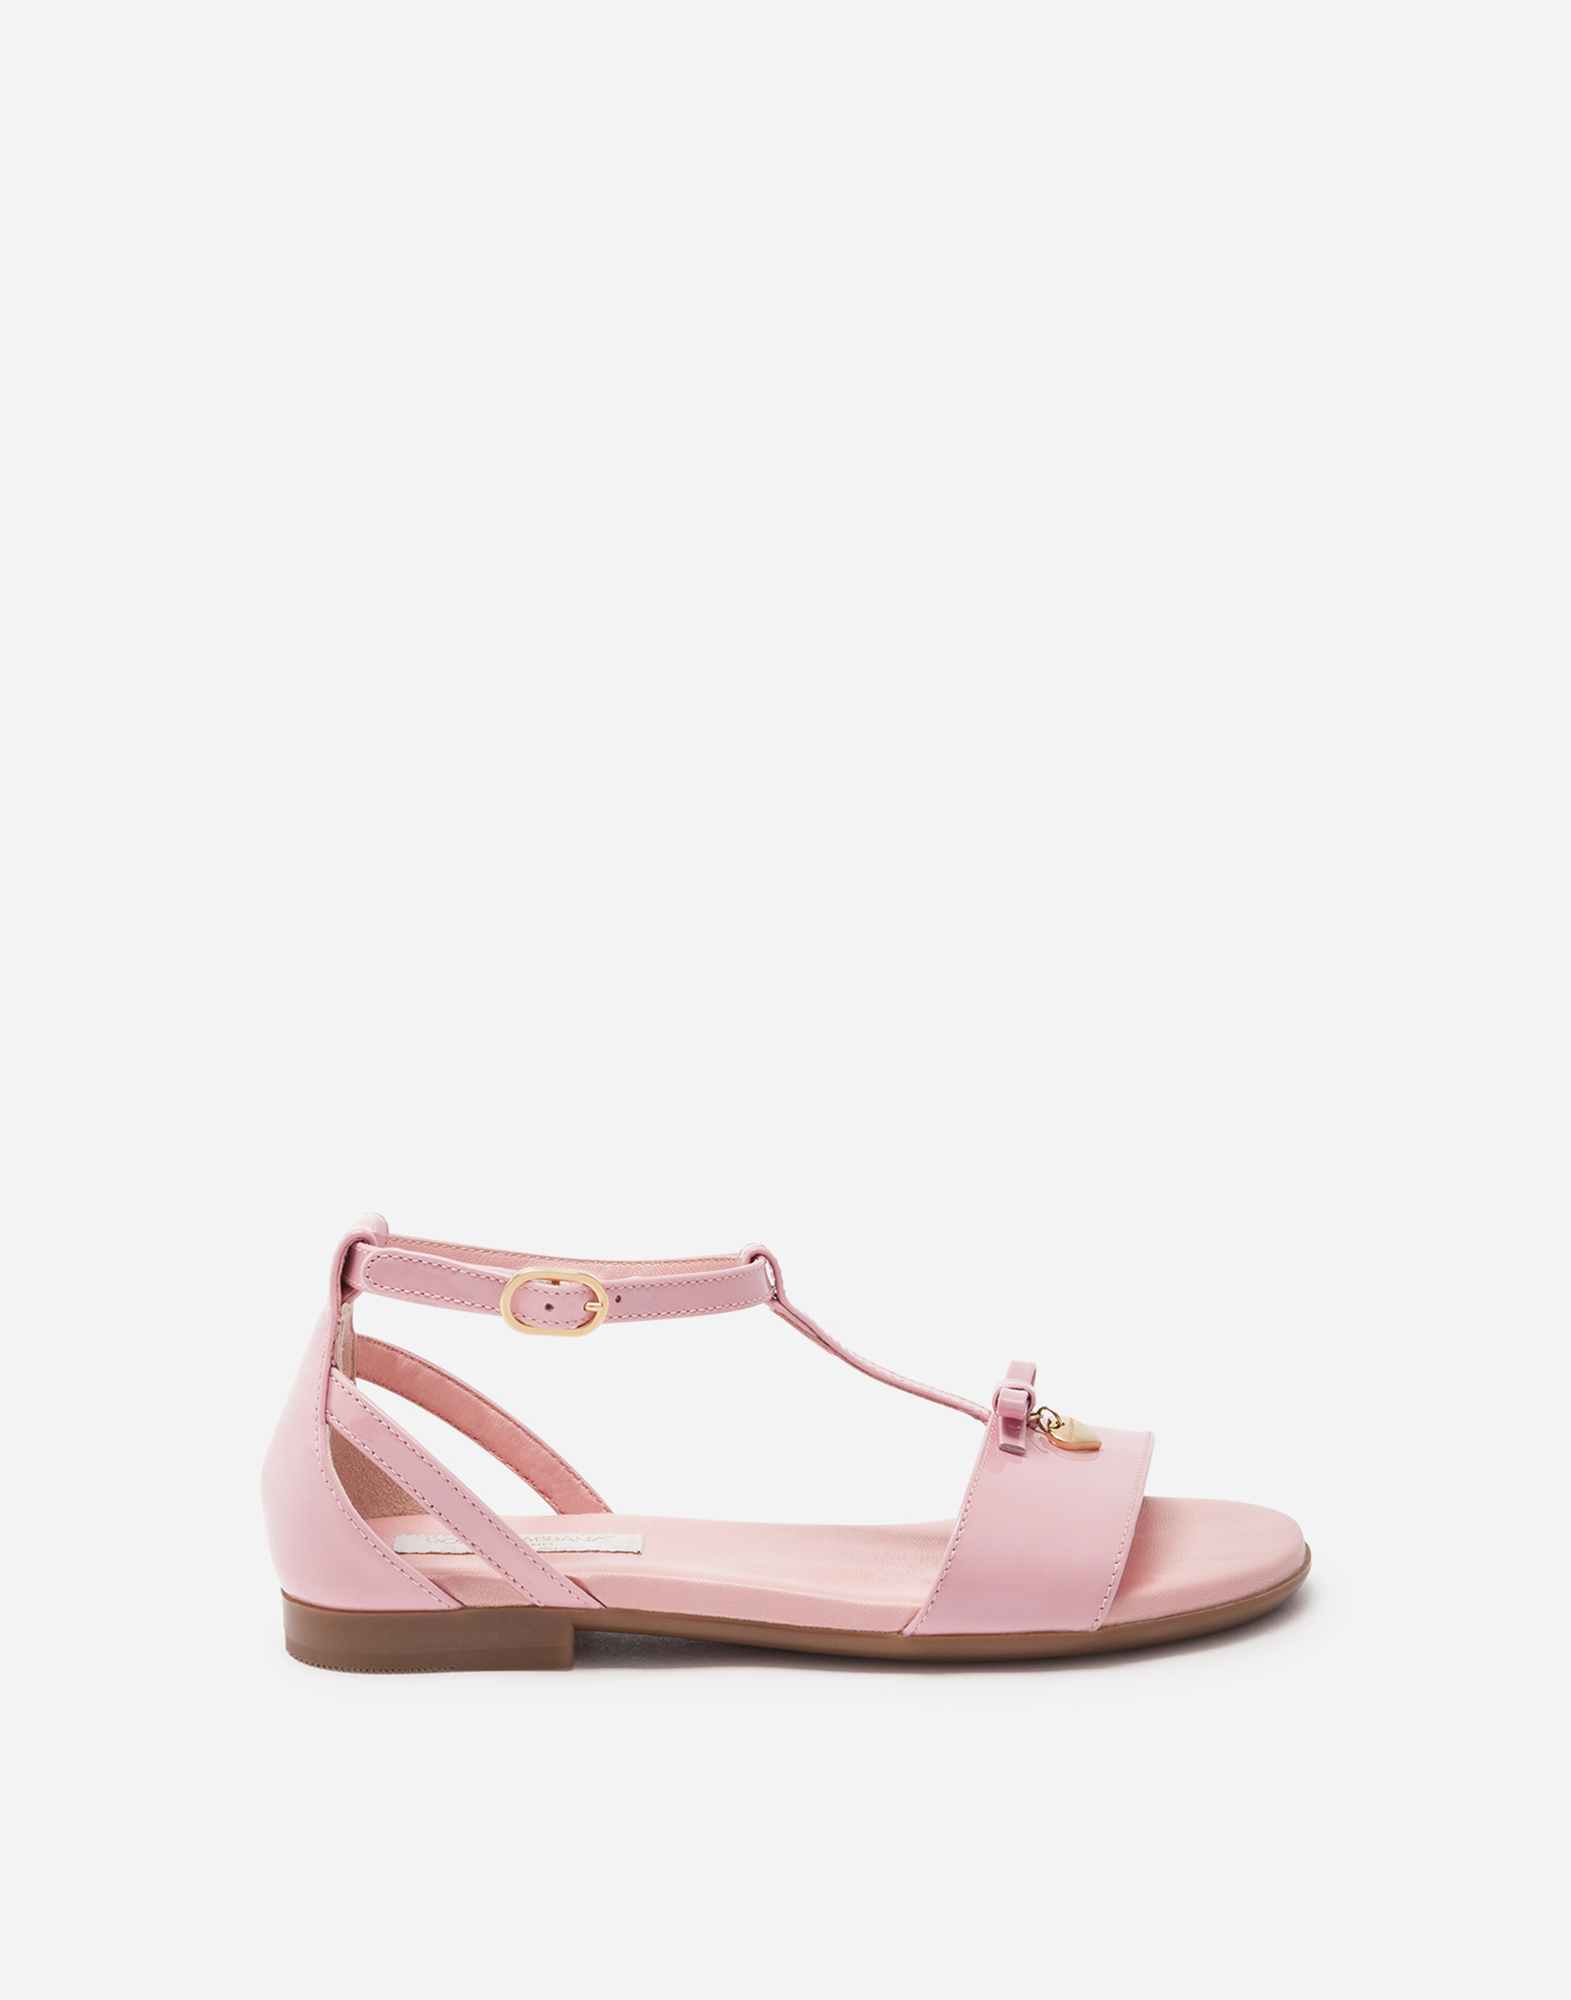 T-strap patent leather sandal in Pink